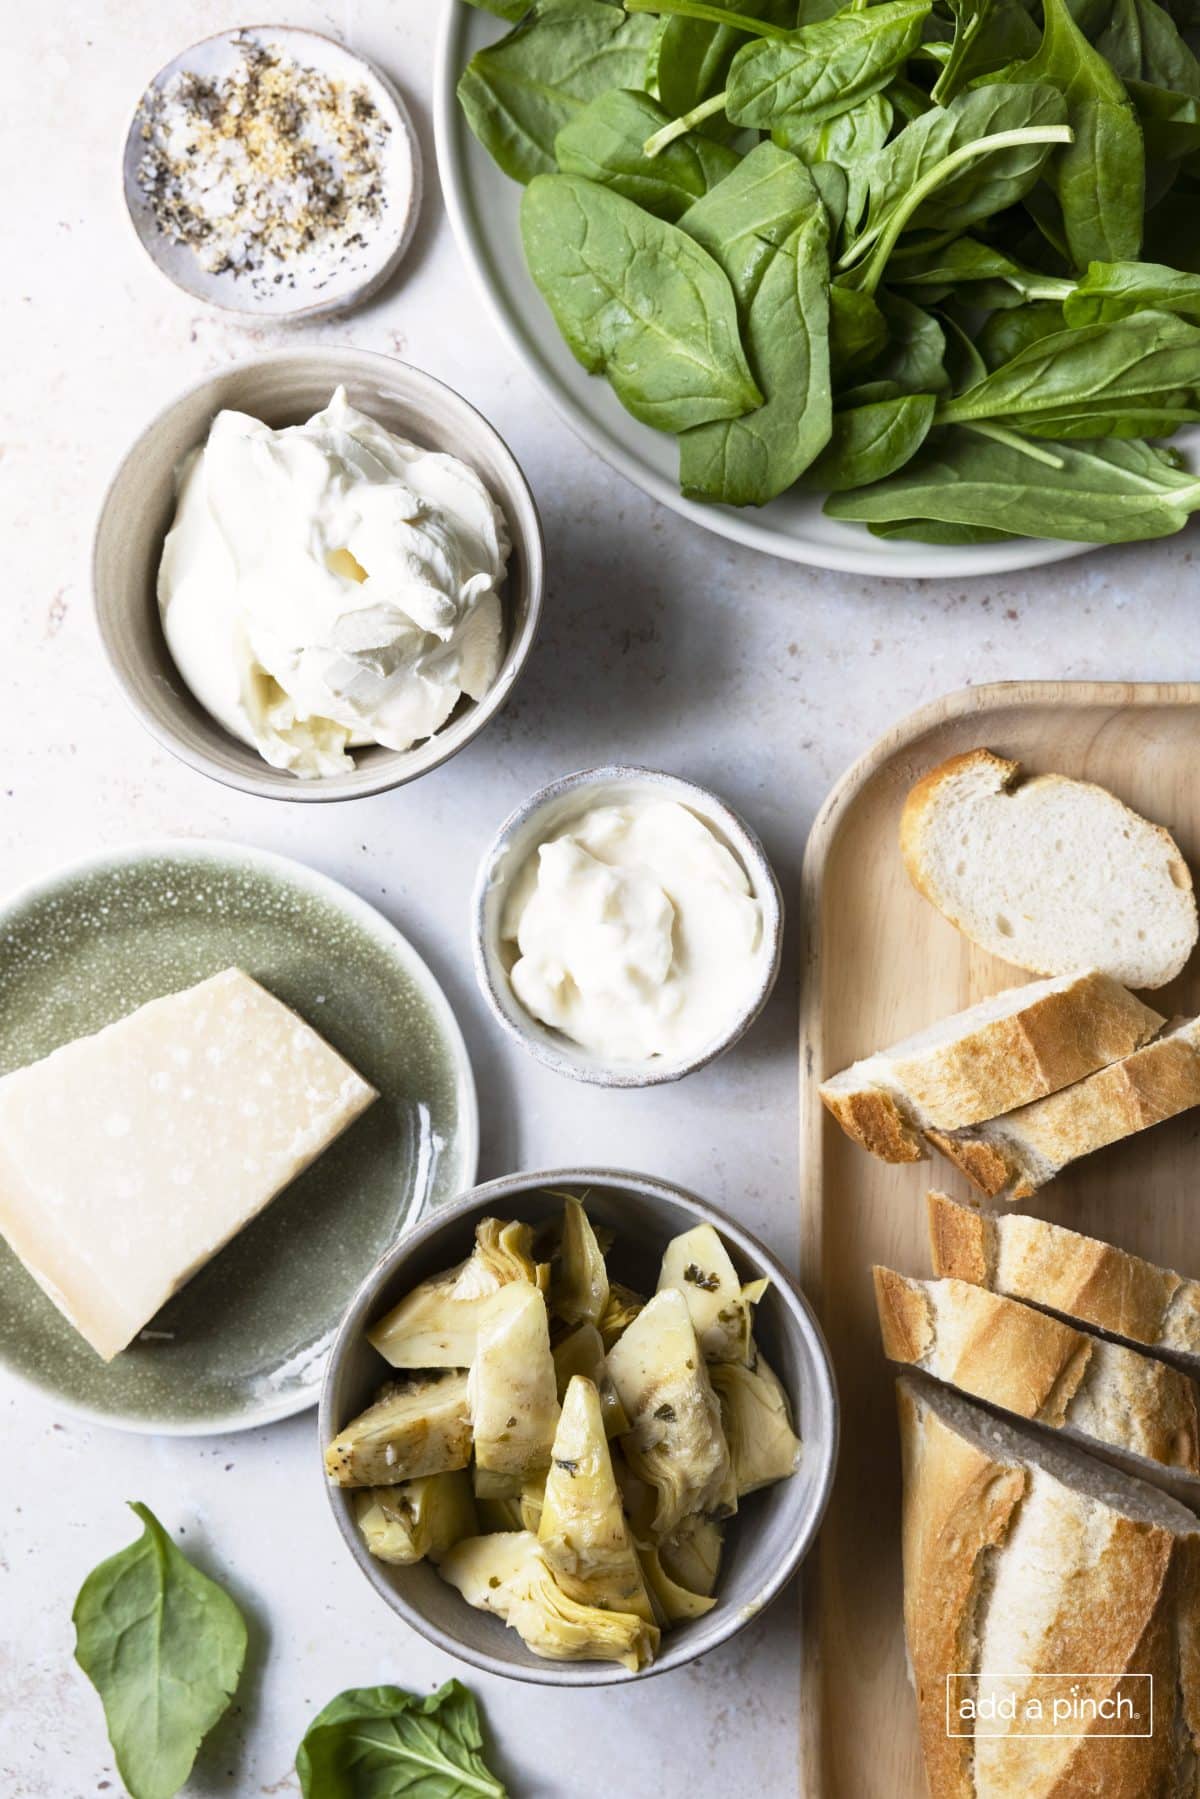 Photograph of ingredients needed to make and serve spinach artichoke dip recipe.